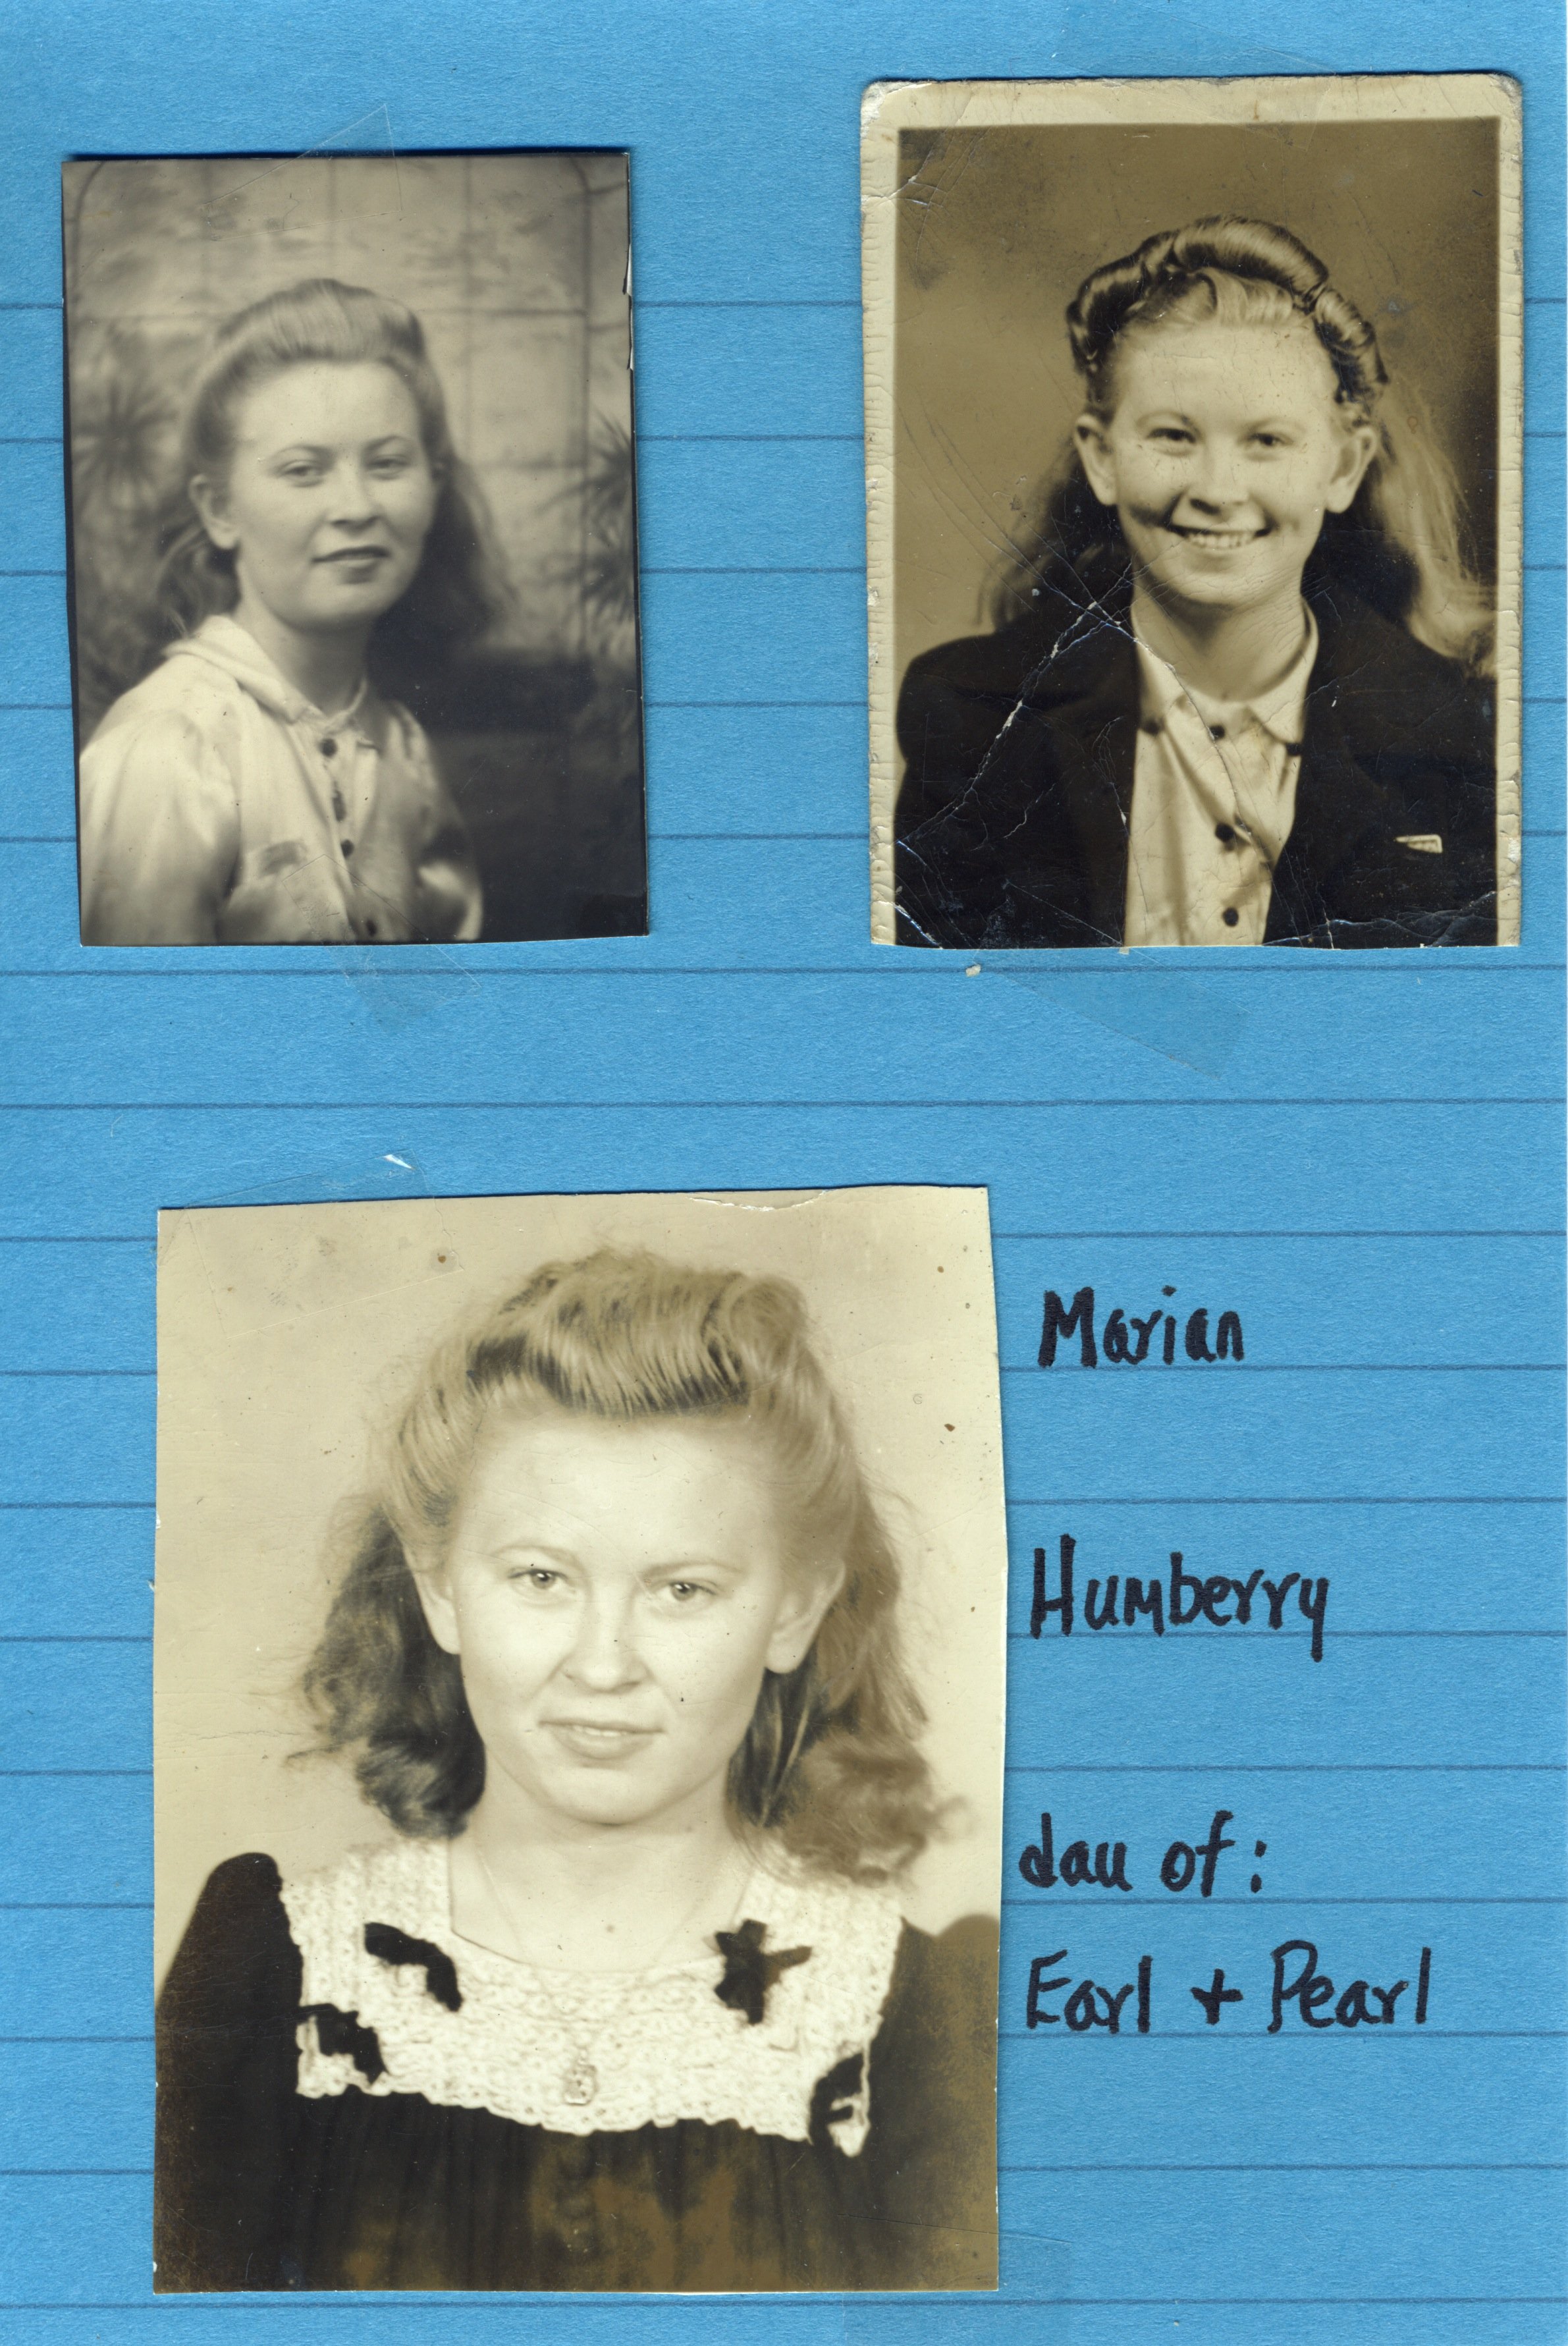 Marion Hunberry (daughter of Earl and Pearl)